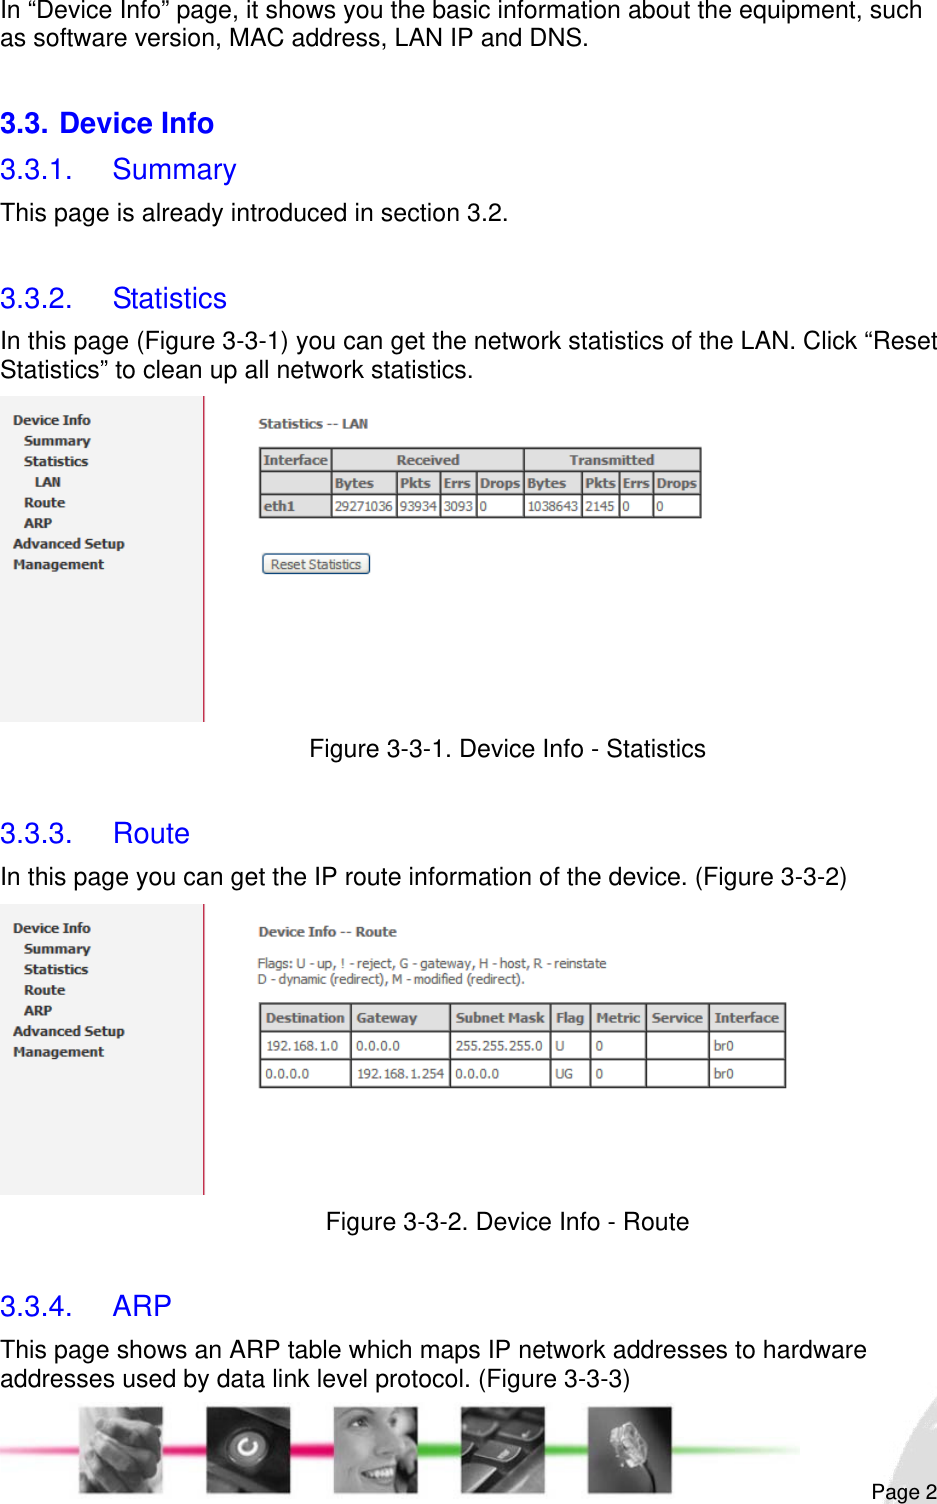                                                                                                                                                                                                       In “Device Info” page, it shows you the basic information about the equipment, such as software version, MAC address, LAN IP and DNS.  3.3. Device Info 3.3.1. Summary This page is already introduced in section 3.2.  3.3.2. Statistics In this page (Figure 3-3-1) you can get the network statistics of the LAN. Click “Reset Statistics” to clean up all network statistics.  Figure 3-3-1. Device Info - Statistics  3.3.3. Route In this page you can get the IP route information of the device. (Figure 3-3-2)  Figure 3-3-2. Device Info - Route  3.3.4. ARP This page shows an ARP table which maps IP network addresses to hardware addresses used by data link level protocol. (Figure 3-3-3)  Page 2 